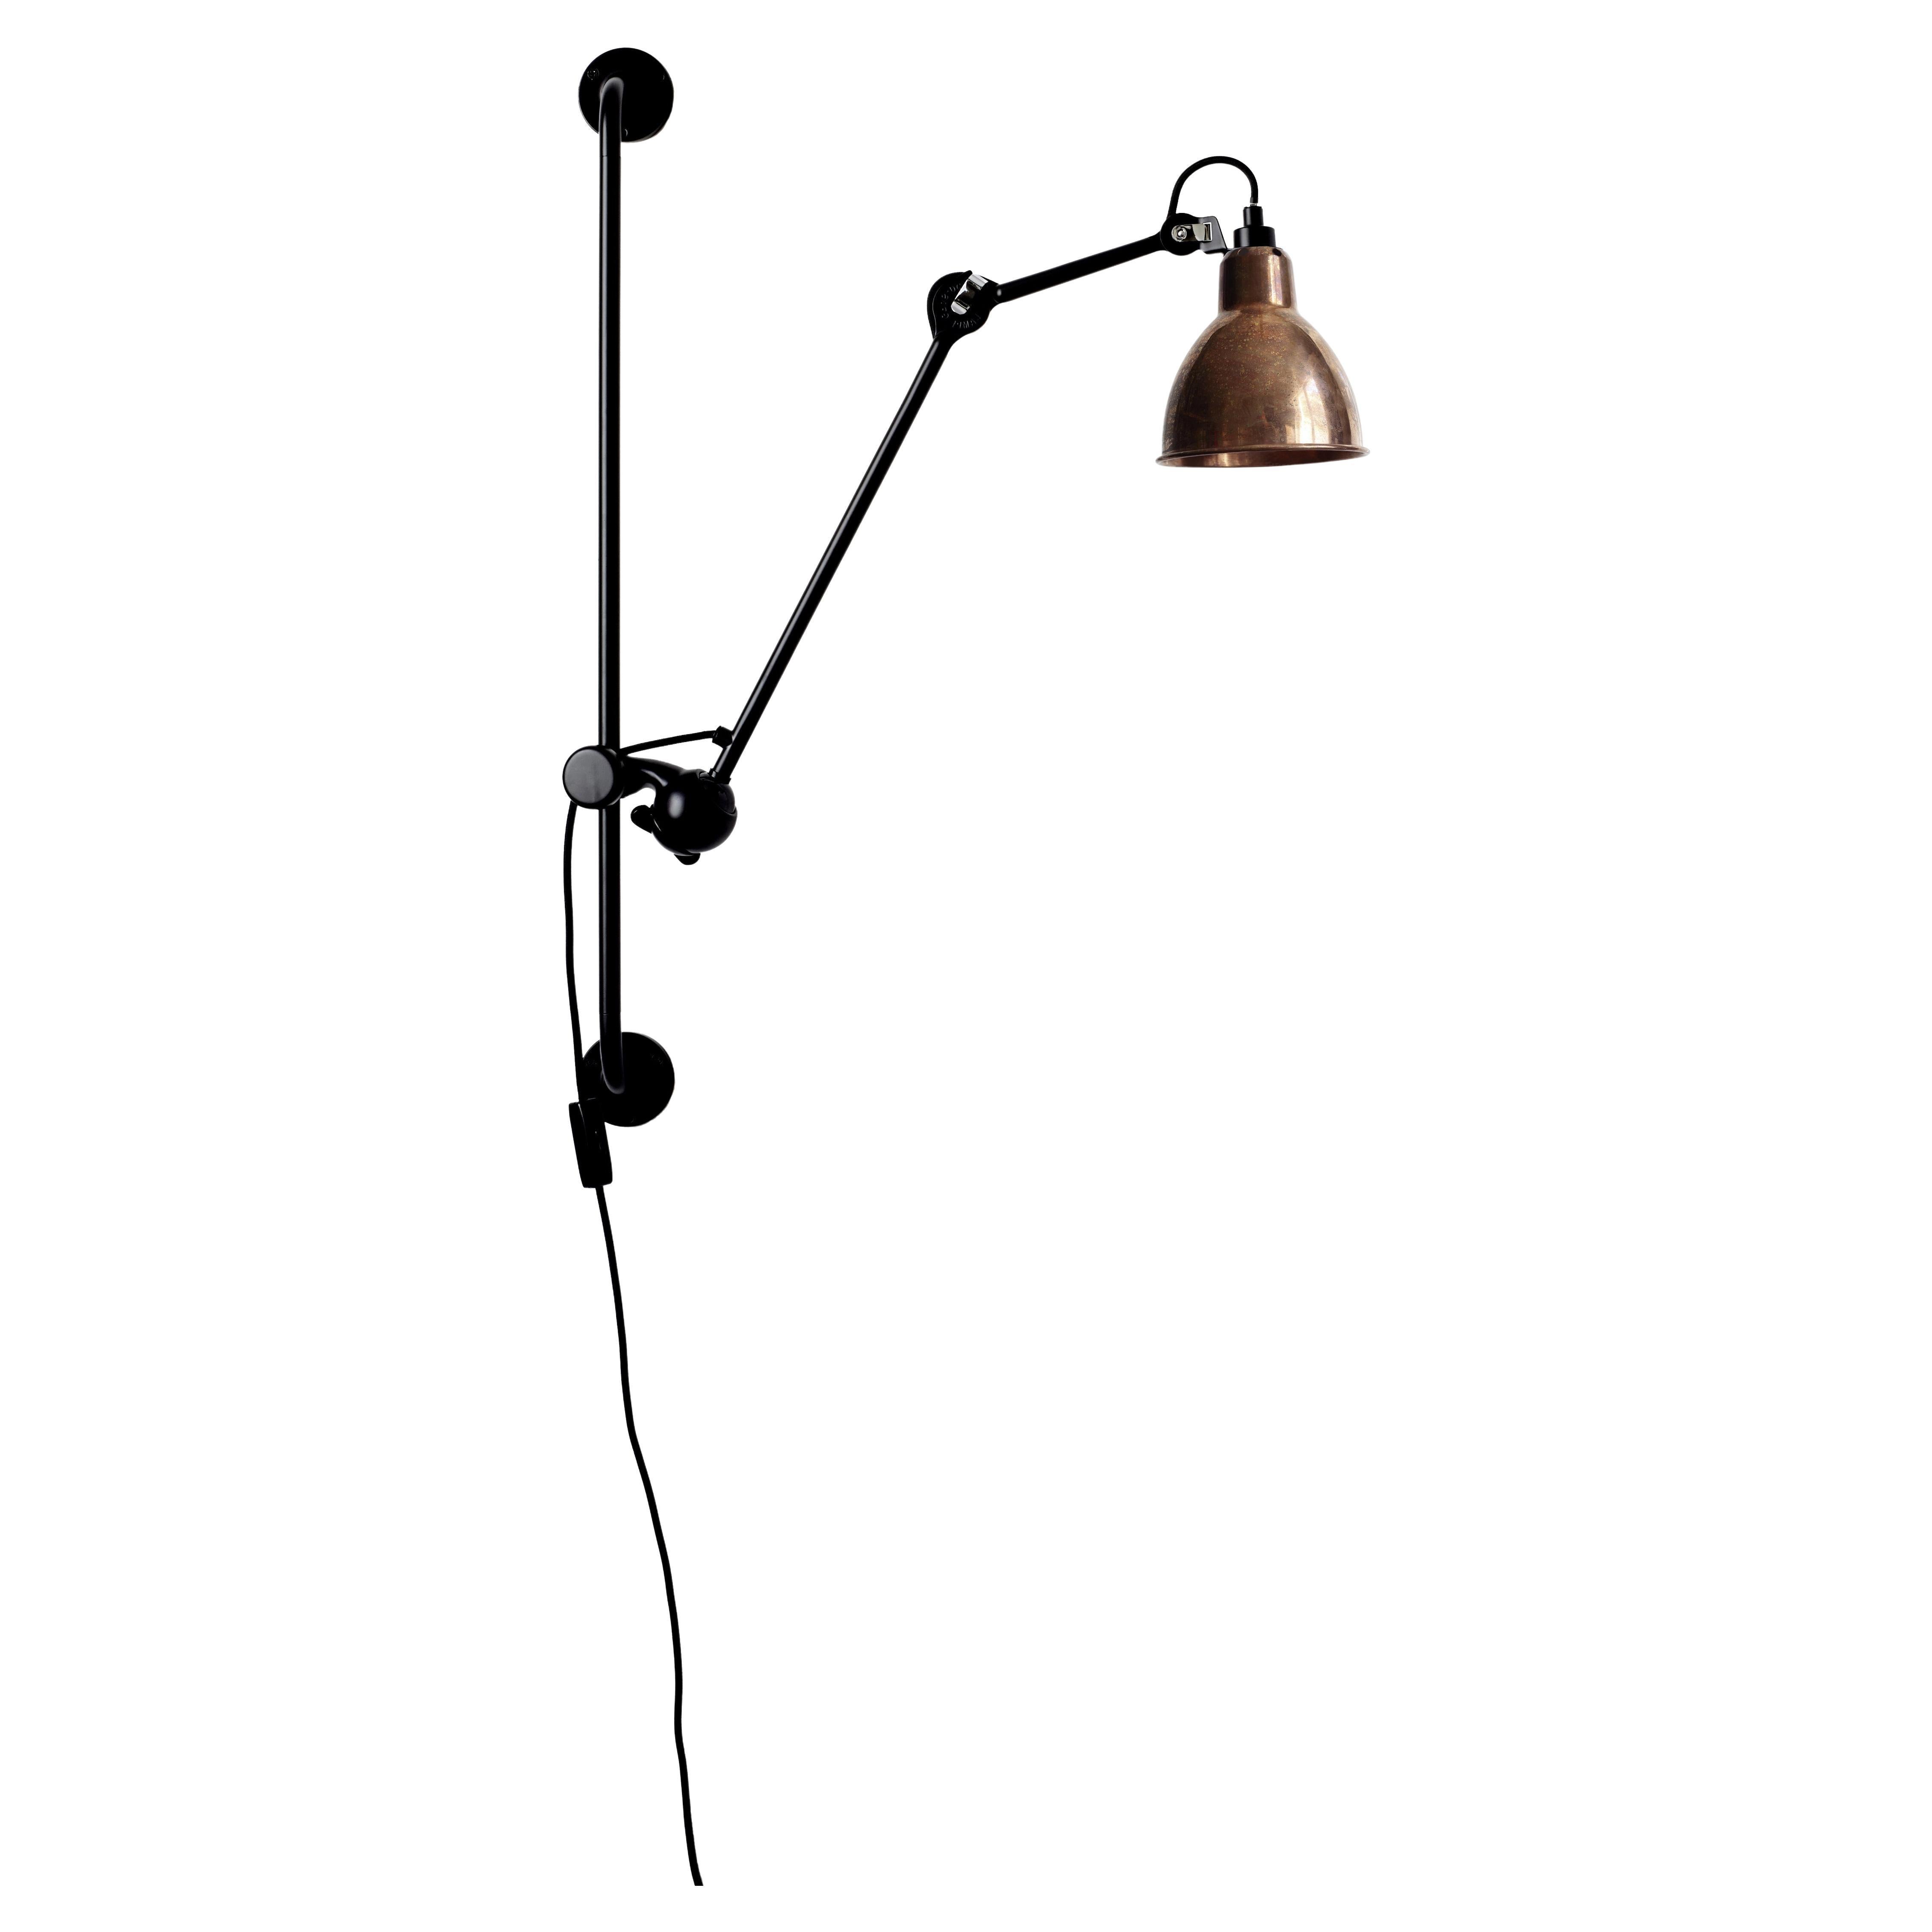 DCW Editions La Lampe Gras N°210 Wall Lamp in Black Arm and Raw Copper Shade For Sale